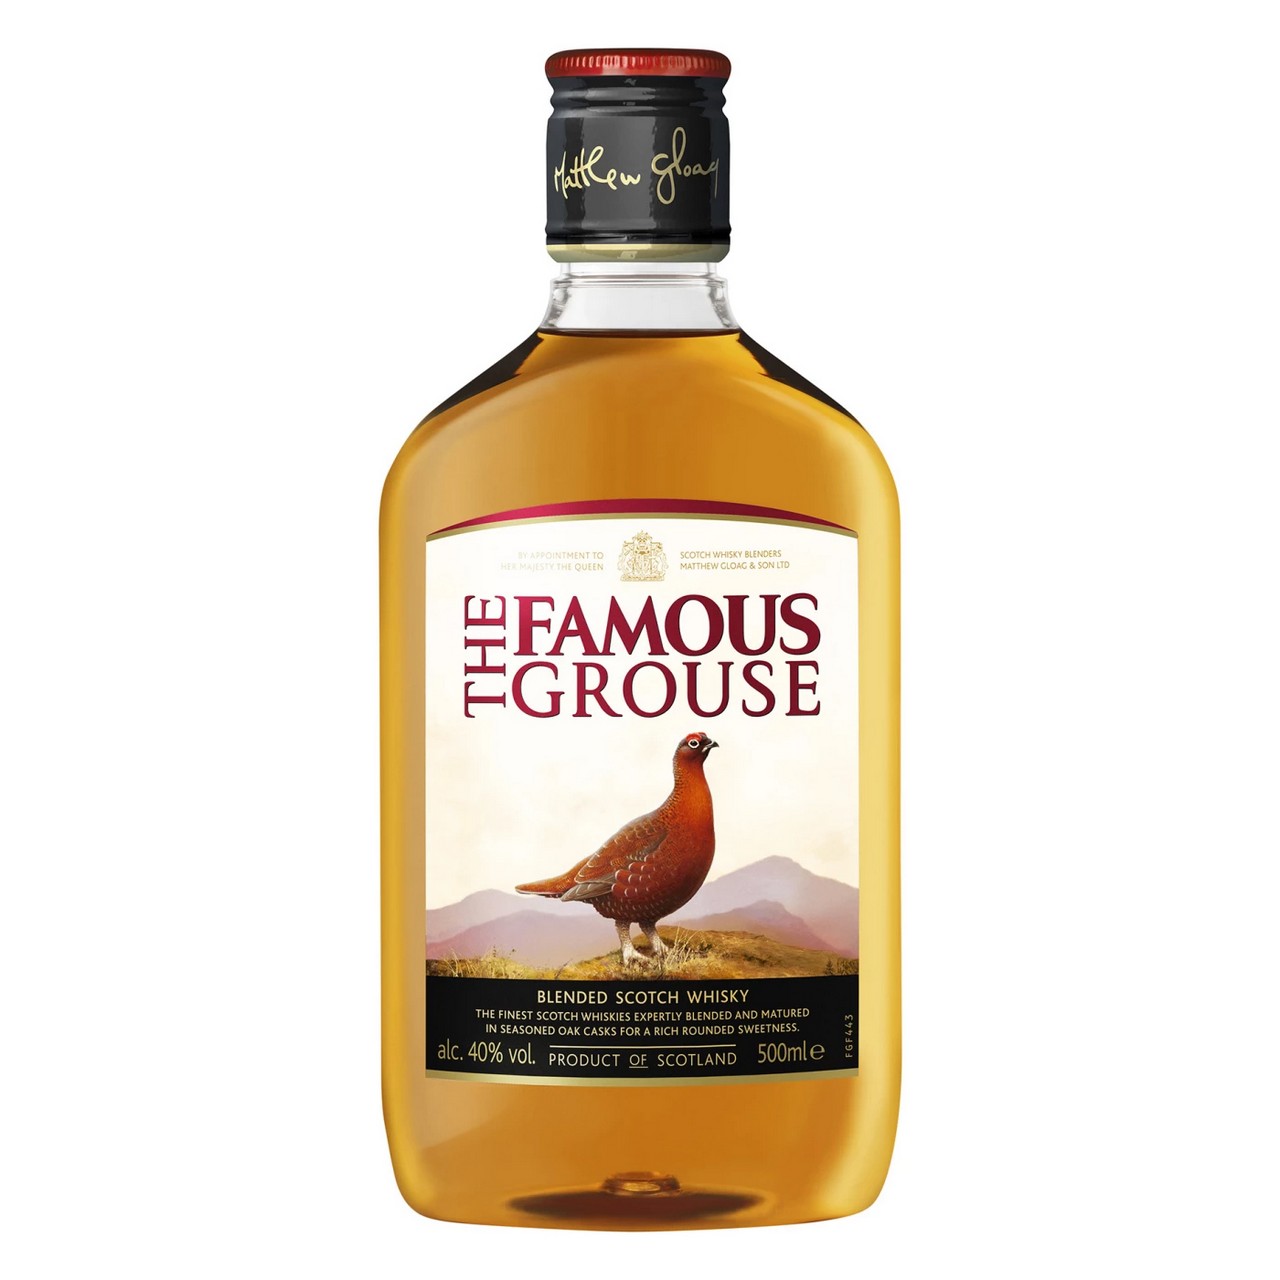 The Famous Grouse 35cl